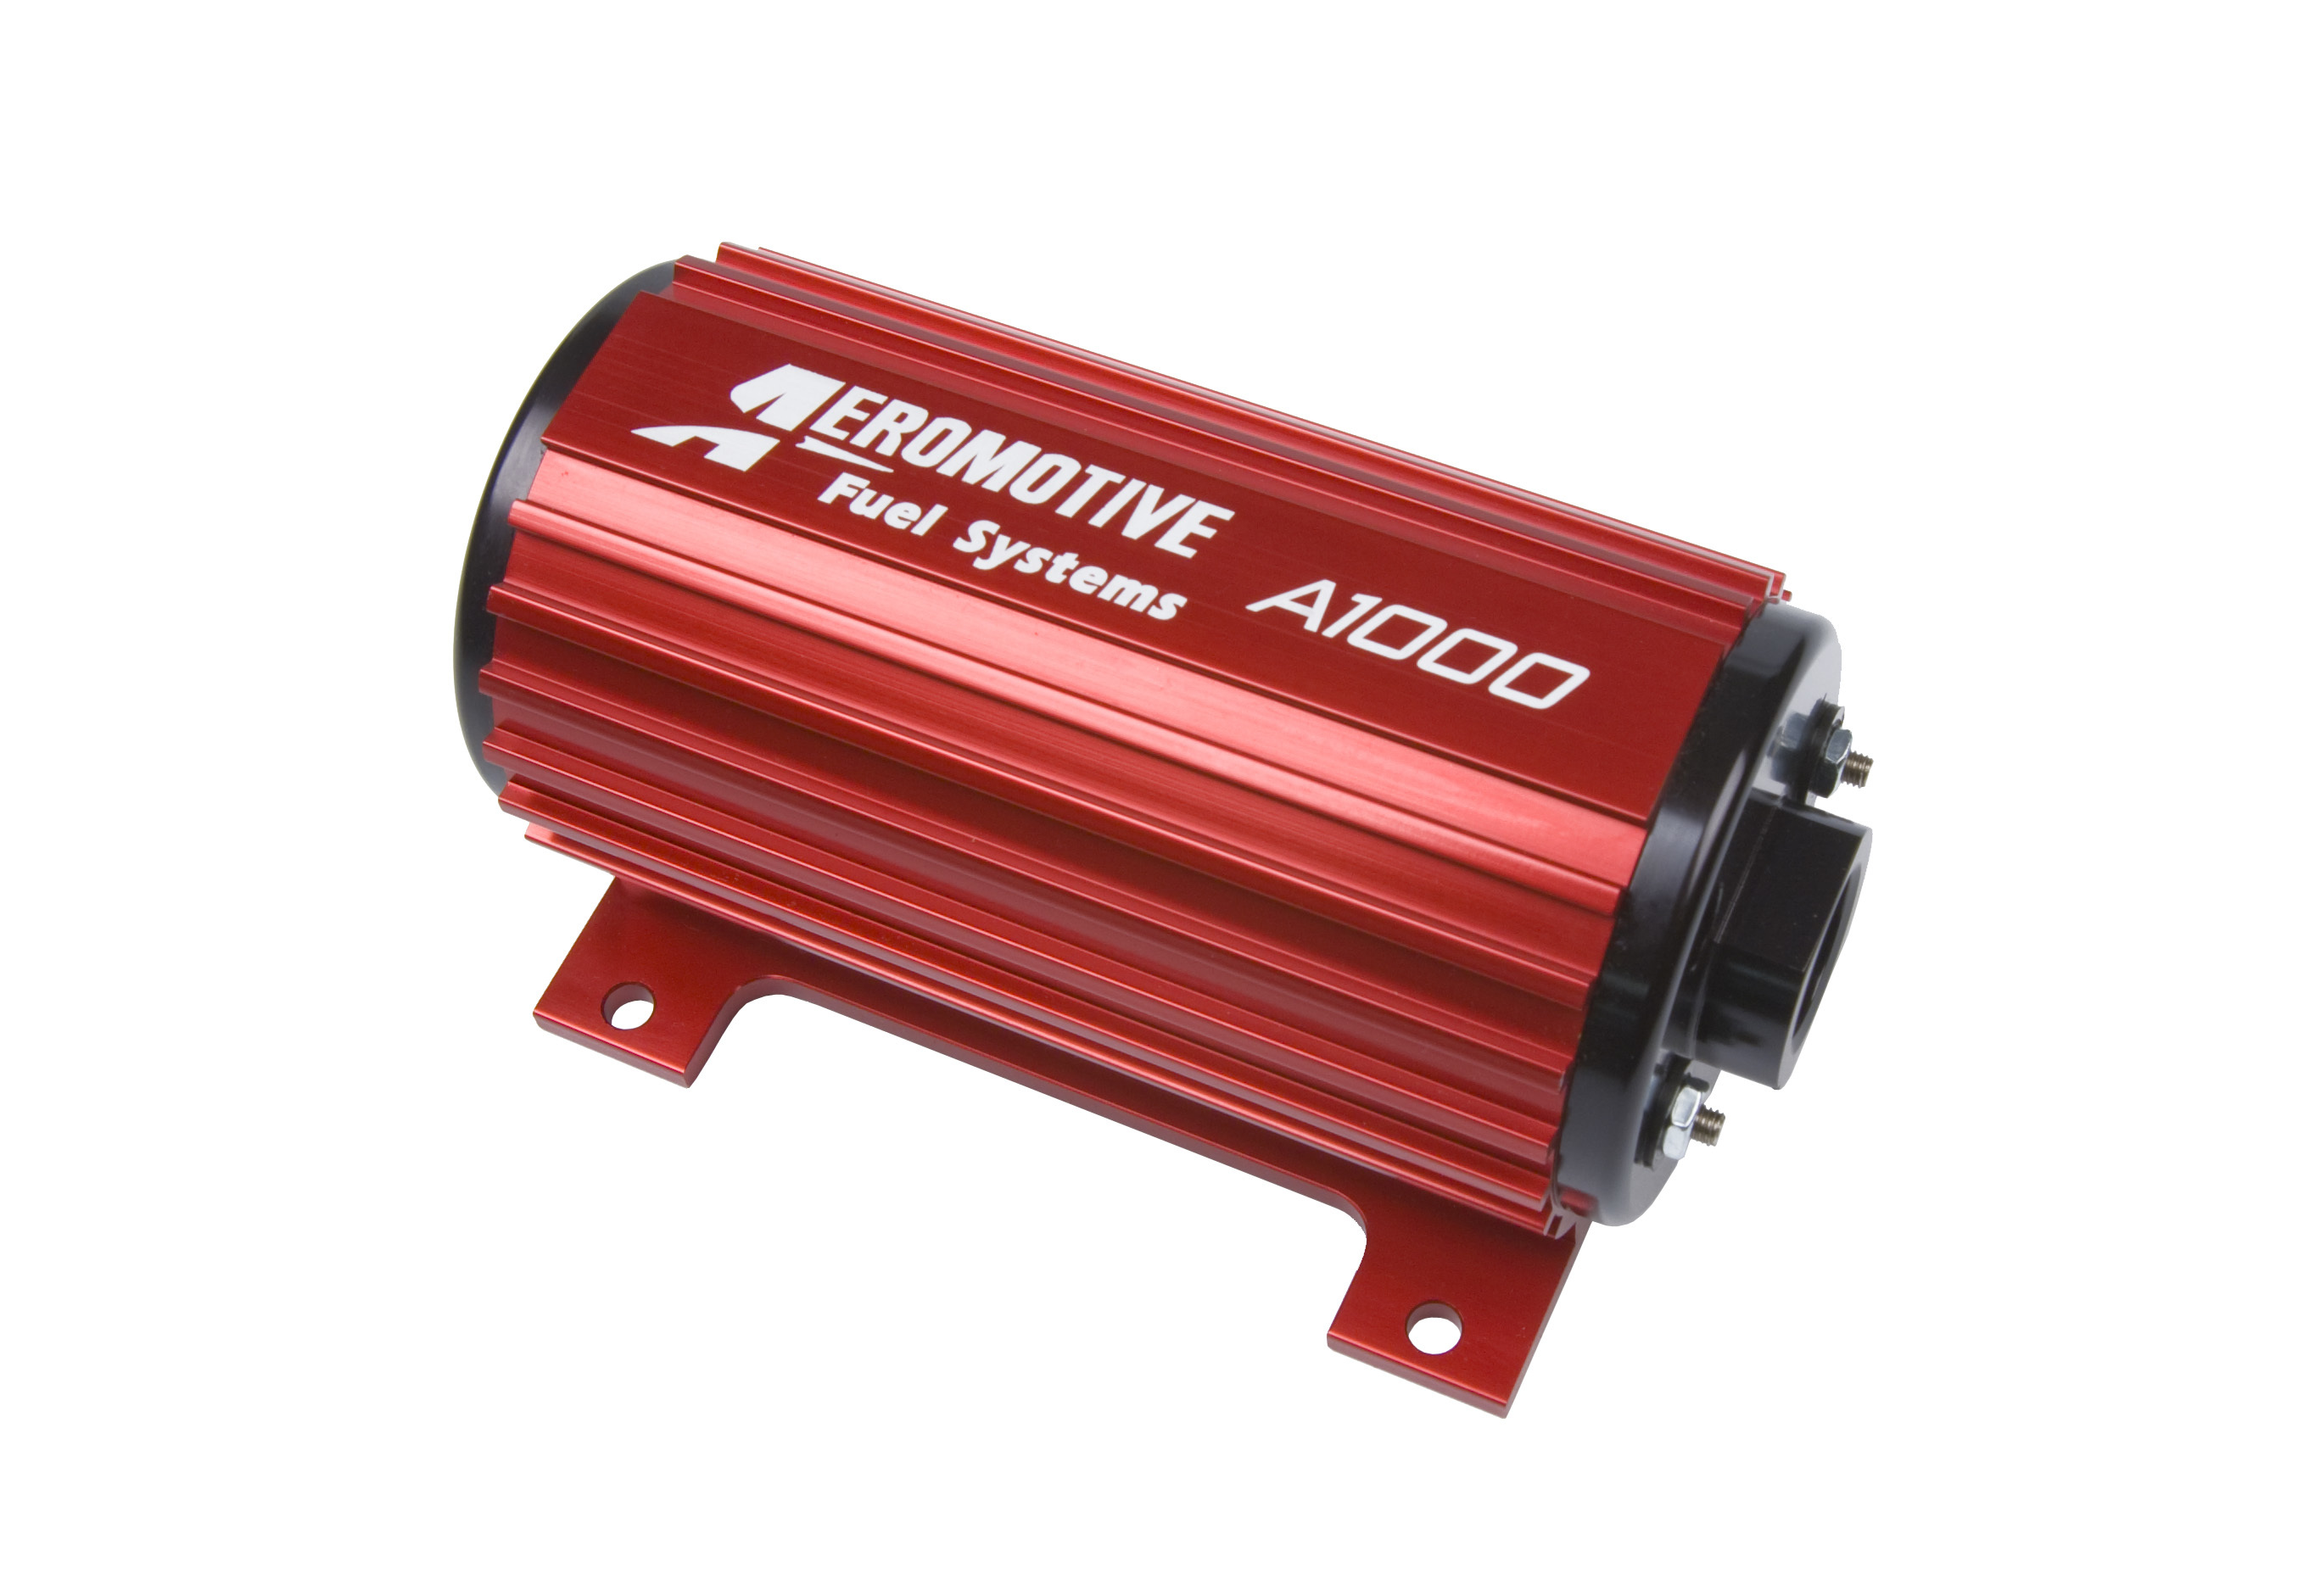 Aeromotive 11101 Fuel Pump, A1000, Electric, In-Line / In-Tank, 117 gph at 45 psi, 10 AN Female O-Ring Inlet / Outlet, Red, E85 / Gas, Each